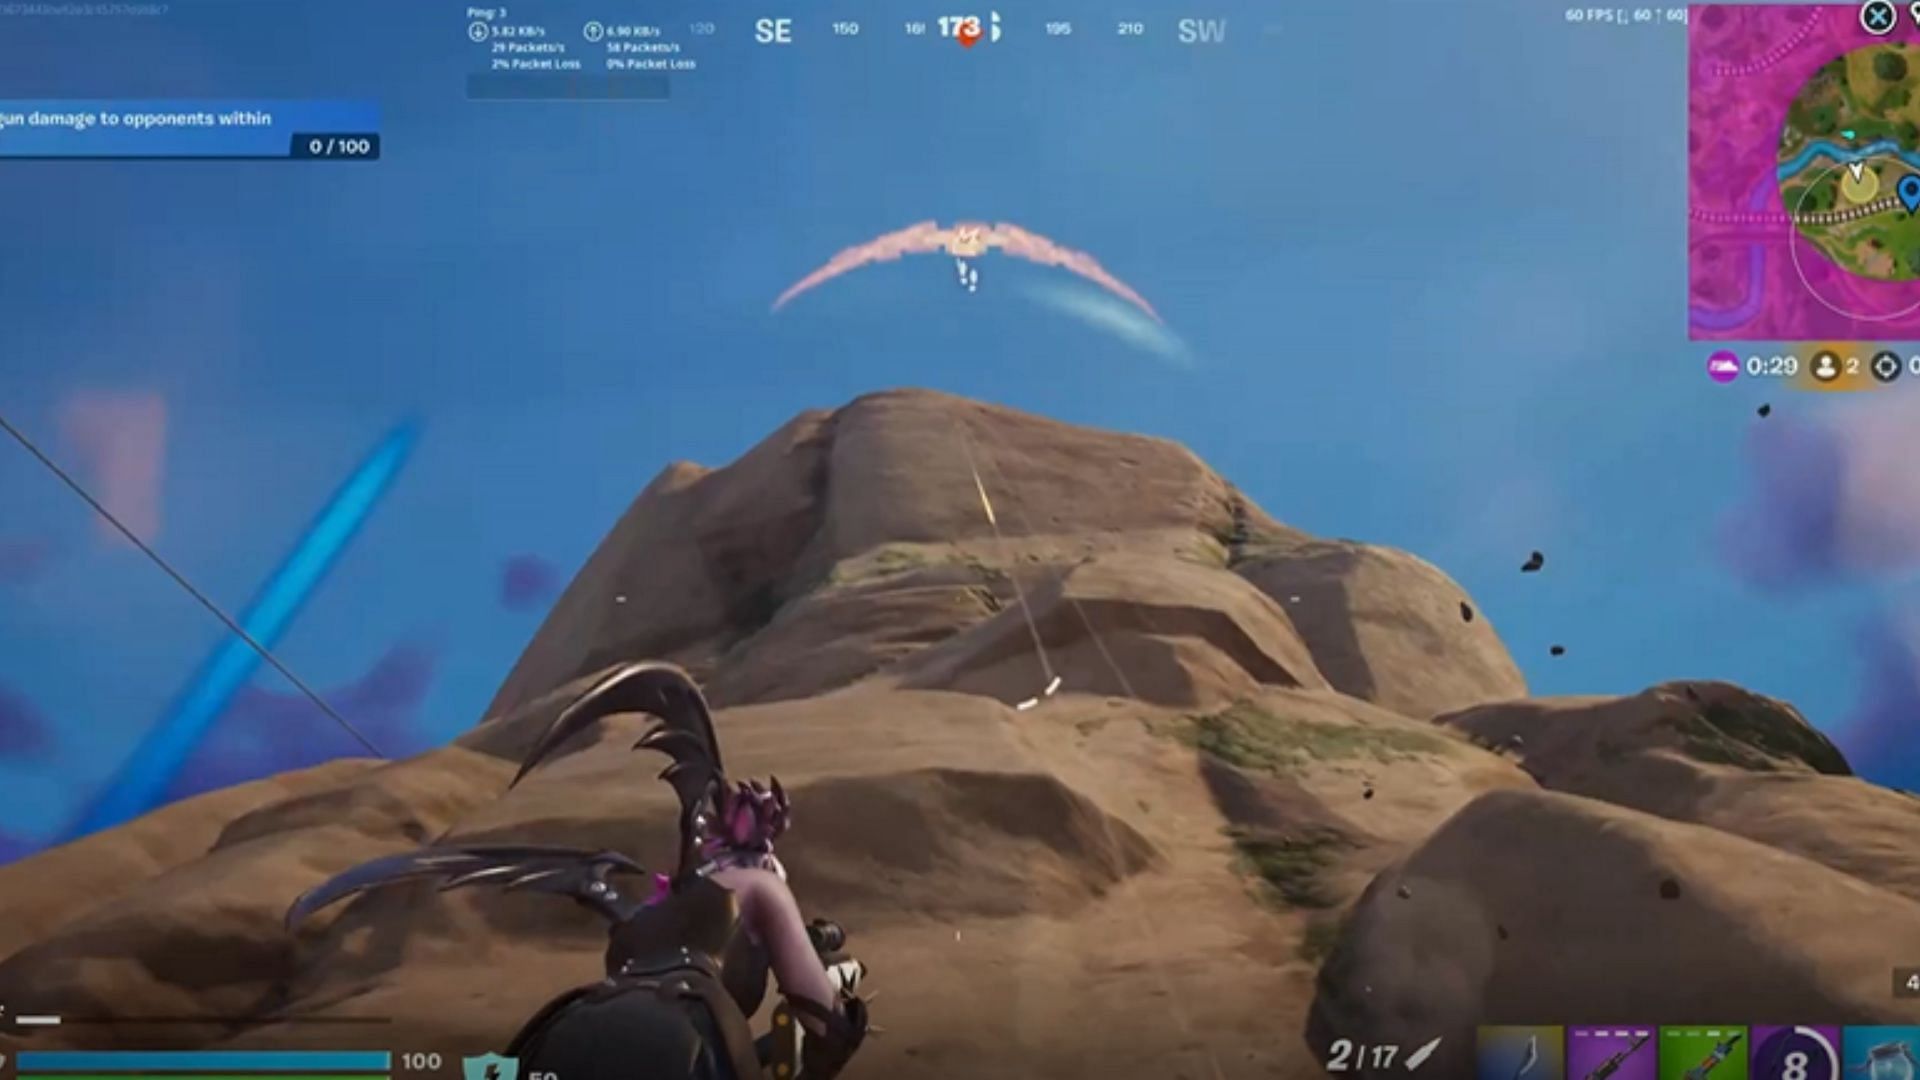 Fortnite glitch allegedly allows player to shoot through a cliff